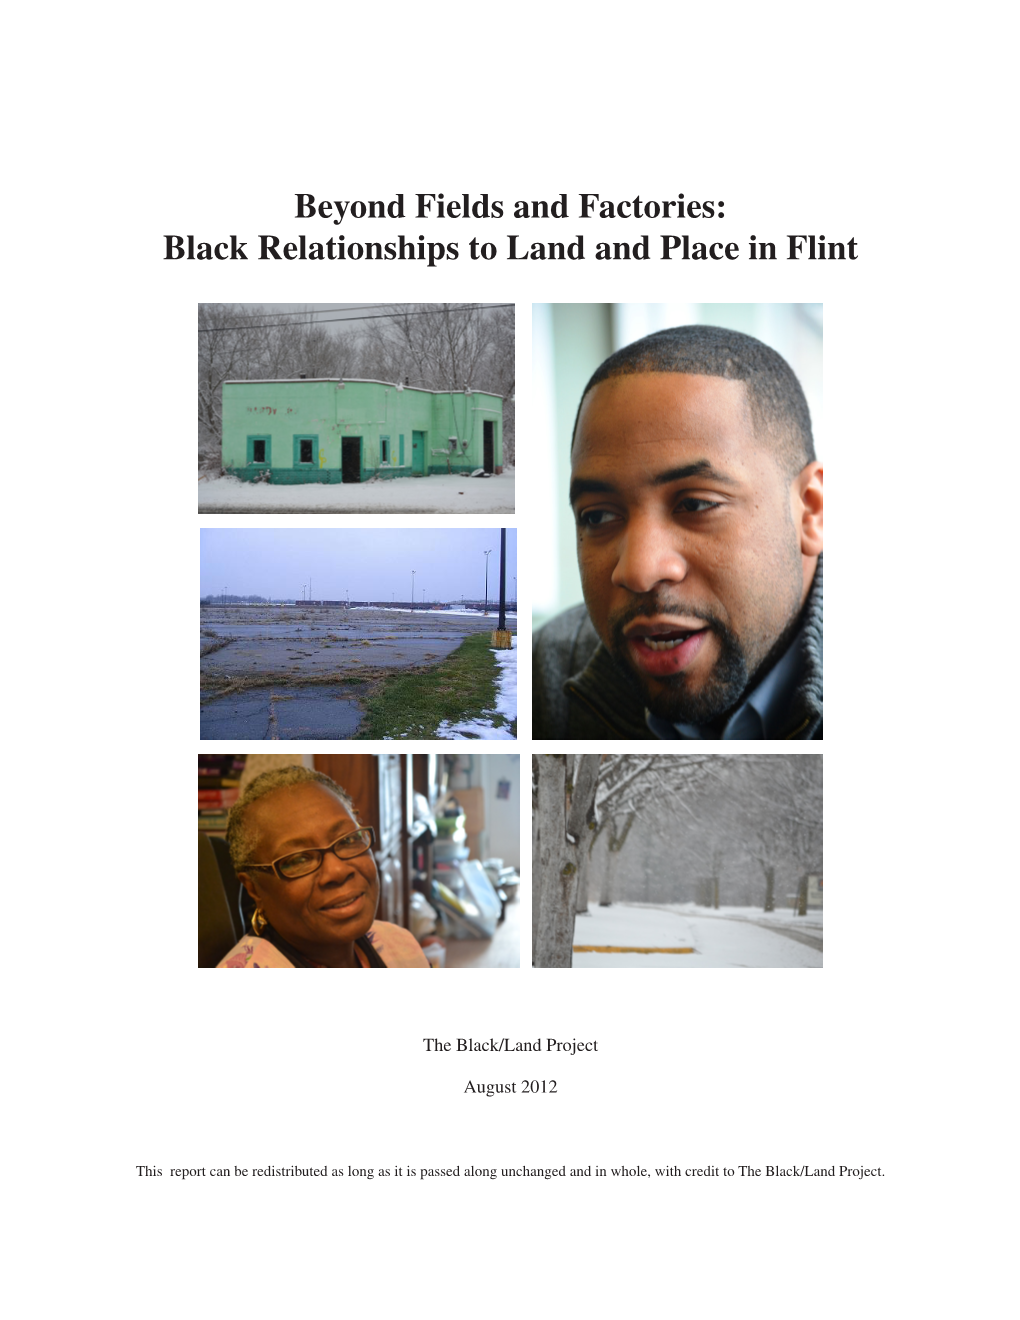 Beyond Fields and Factories: Black Relationships to Land and Place in Flint